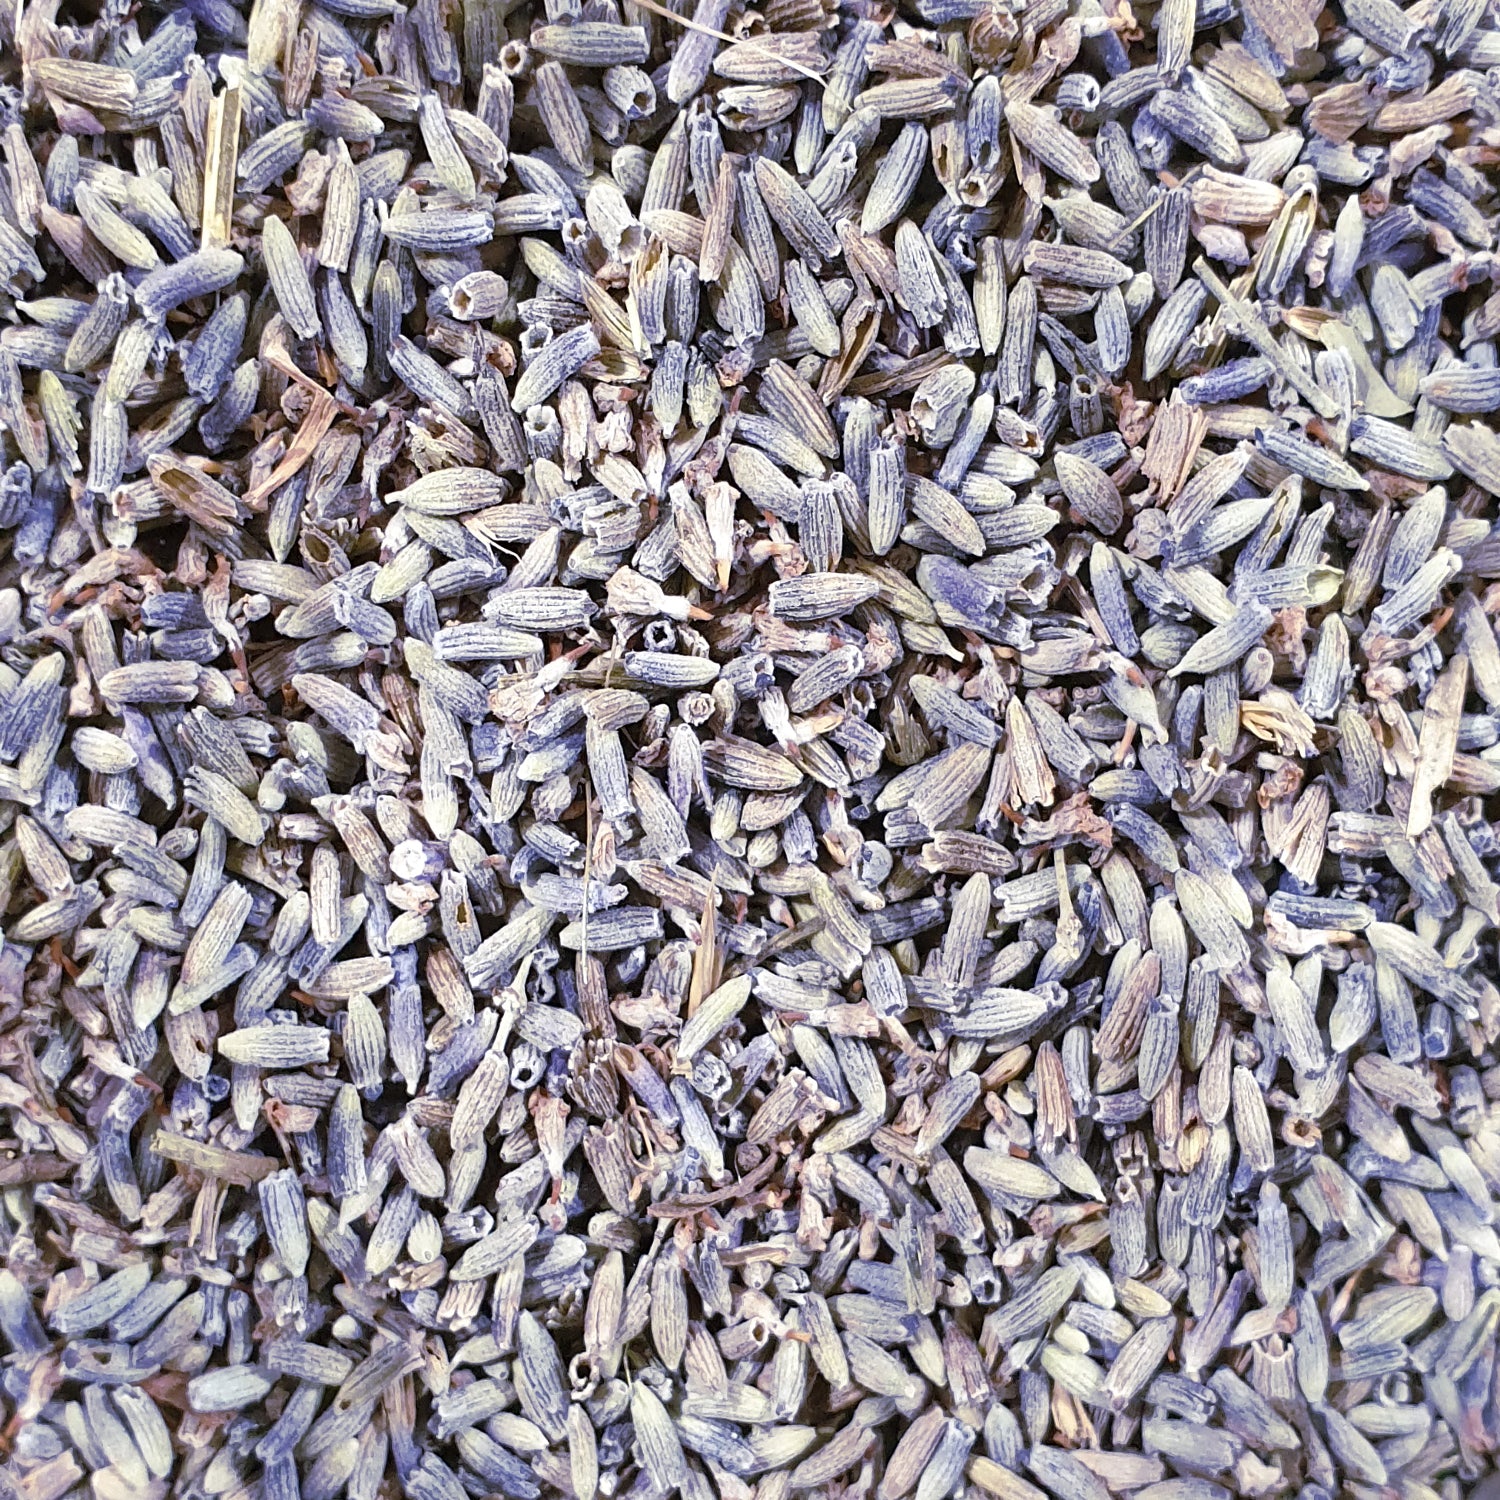 Lavender's magickal uses include love, protection, healing, sleep, purification, and peace.